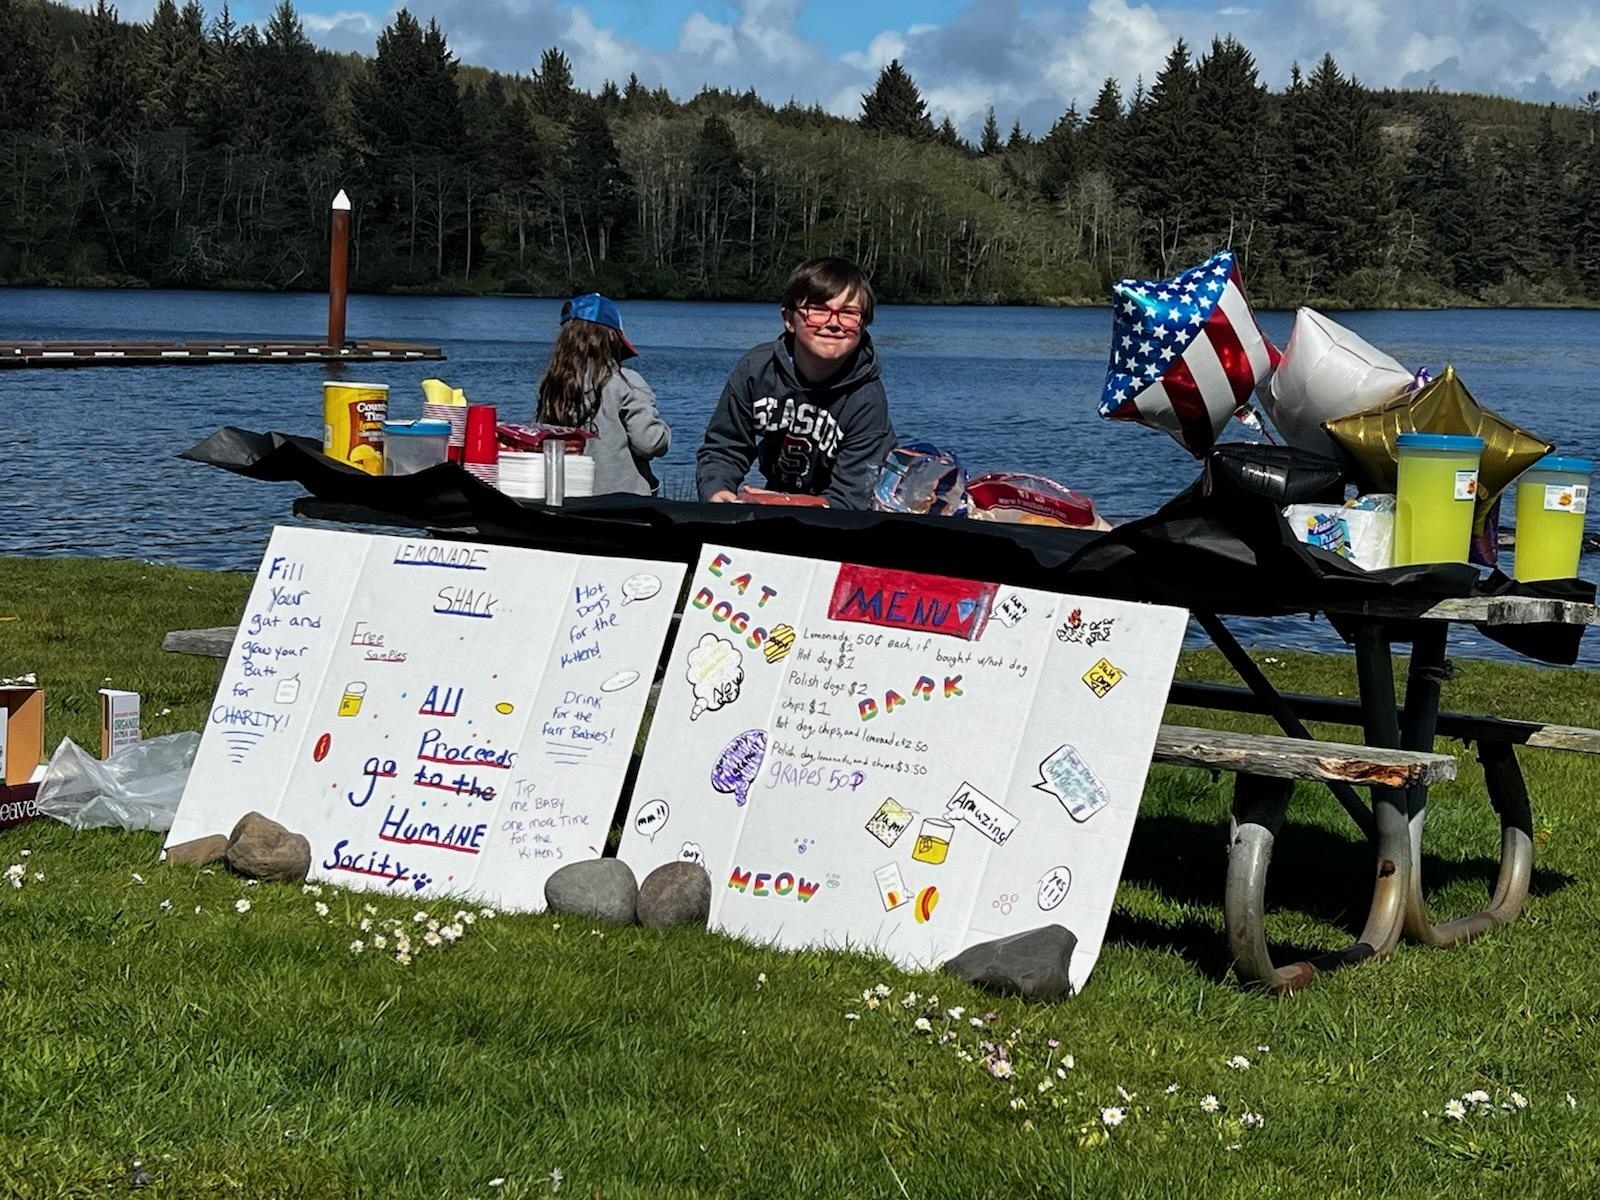 Two kids at a lemonade stand by the lake